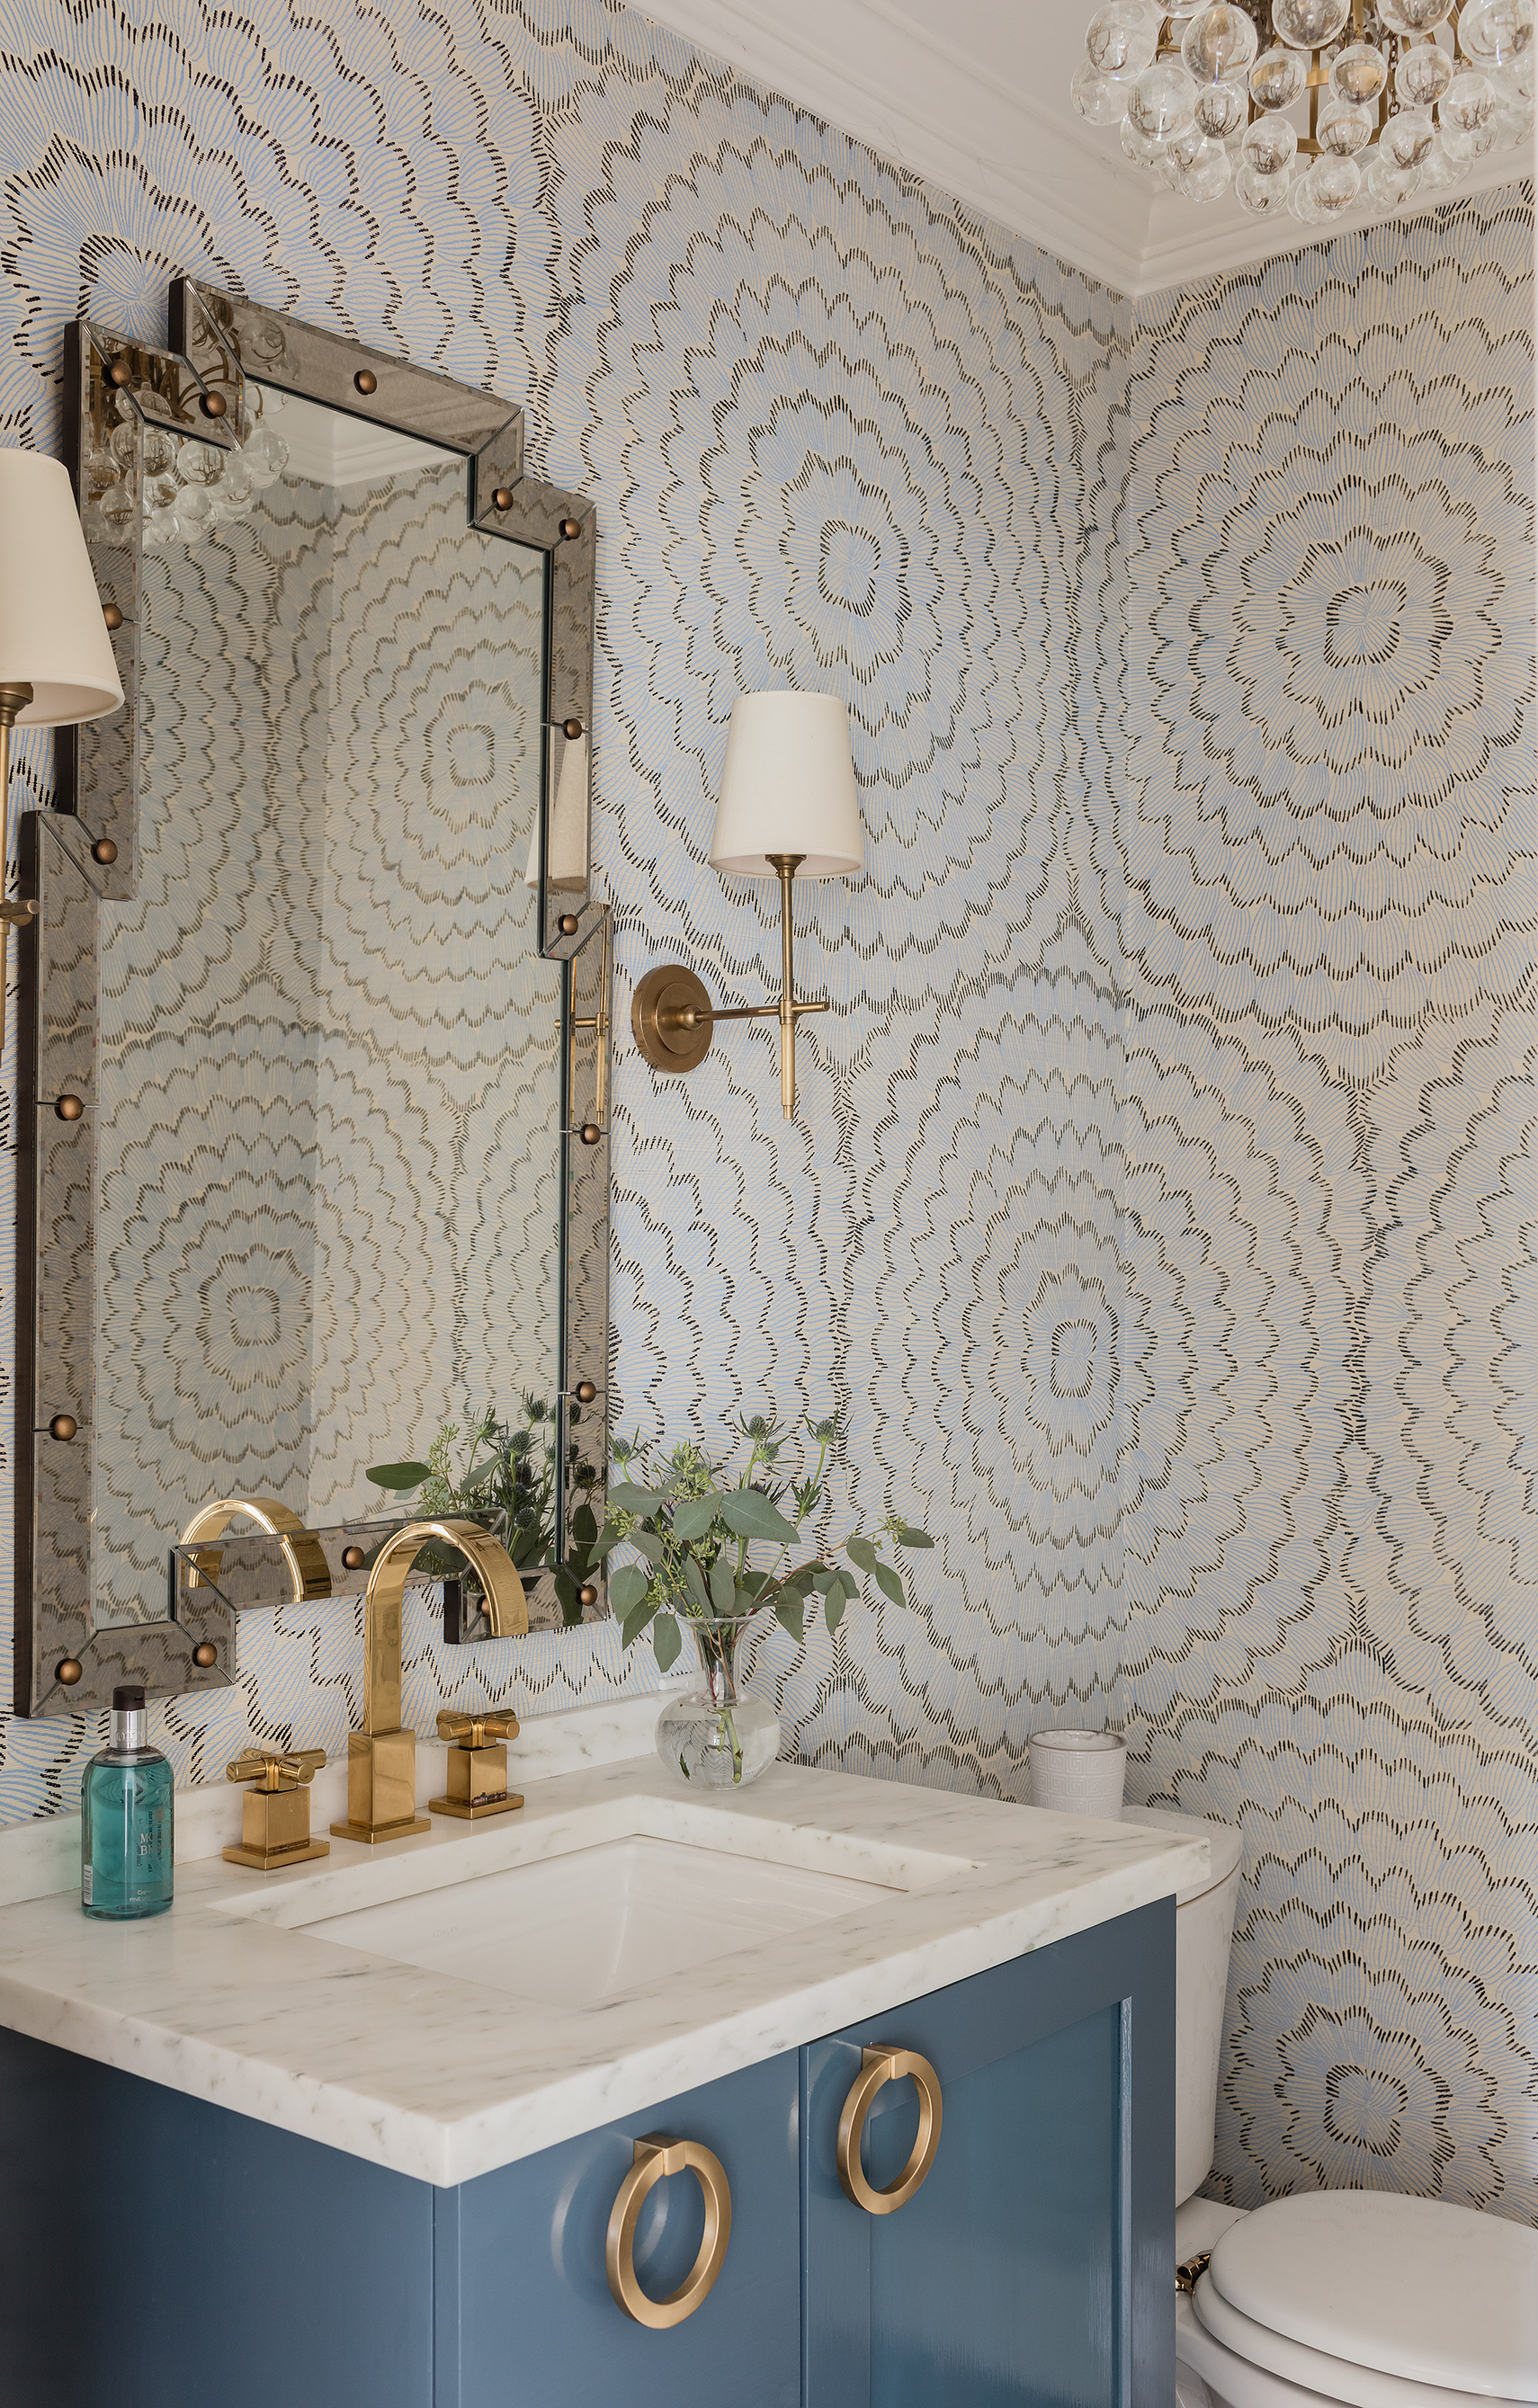 Elements of Style - High vs. Low: Powder Room Design